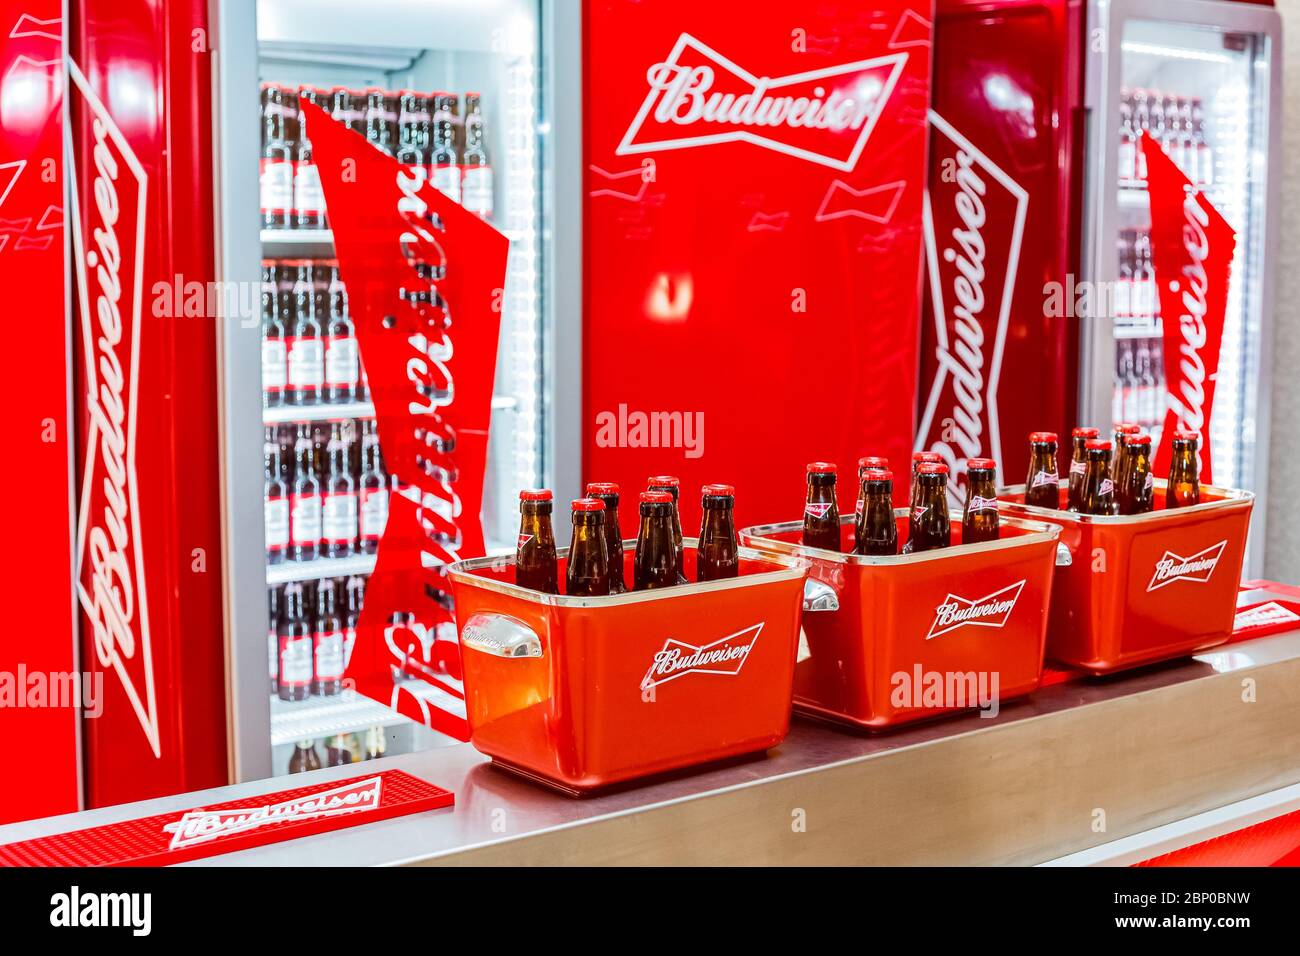 Johannesburg, South Africa - March 27, 2018: Budweiser bottles of beer in red branded ice bucket on bar counter Stock Photo